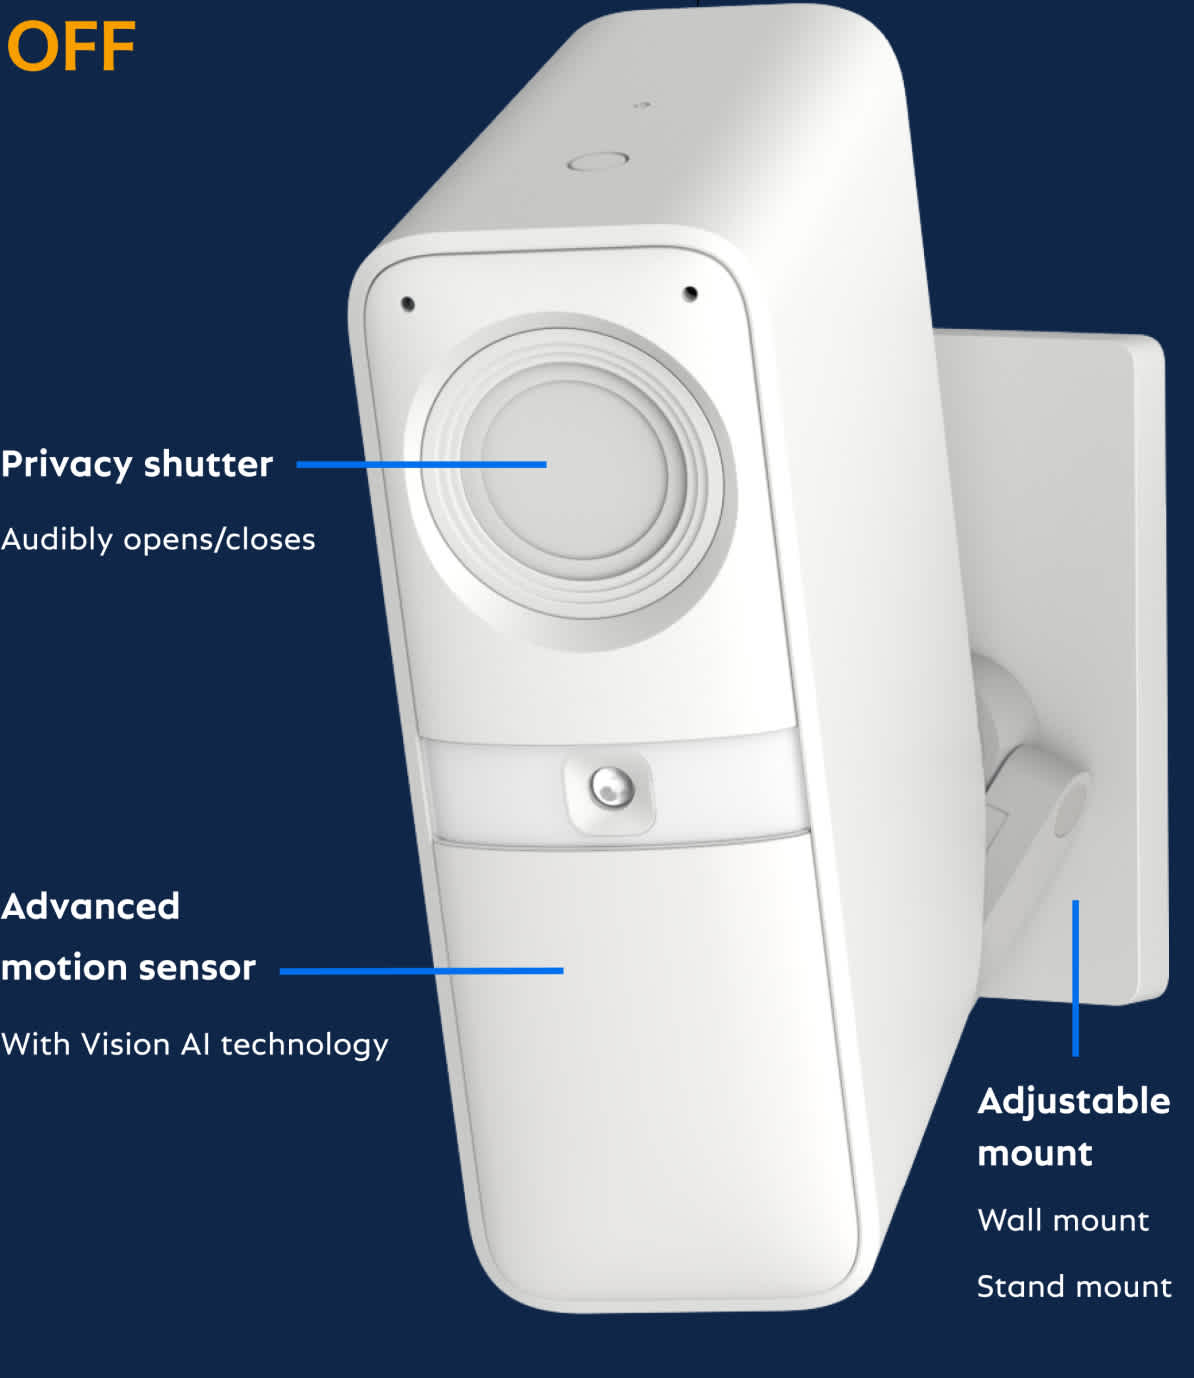 Image diagram of the Wireless Indoor Camera and its features when the shutter is closed.